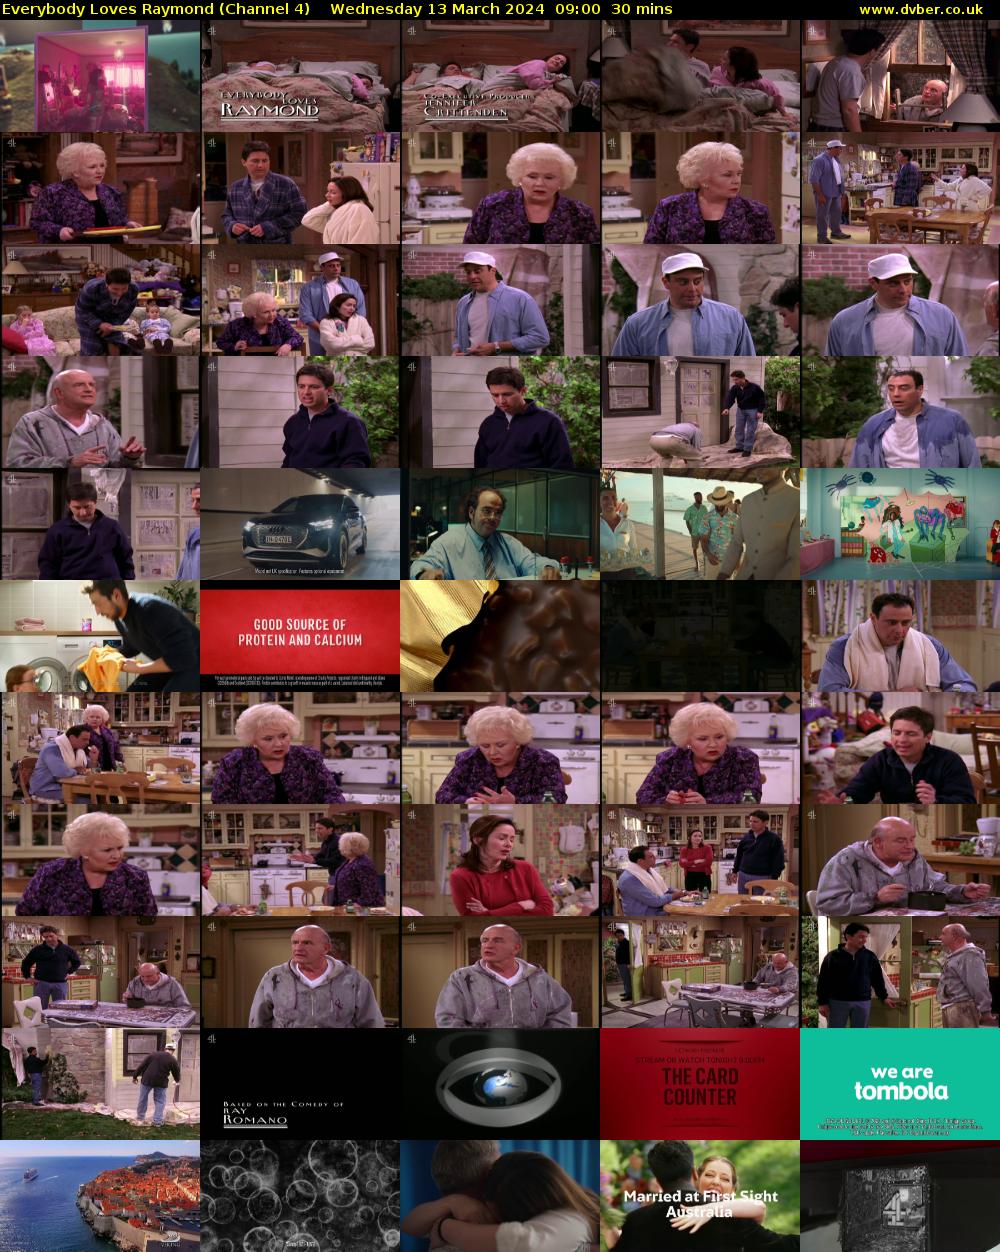 Everybody Loves Raymond (Channel 4) Wednesday 13 March 2024 09:00 - 09:30